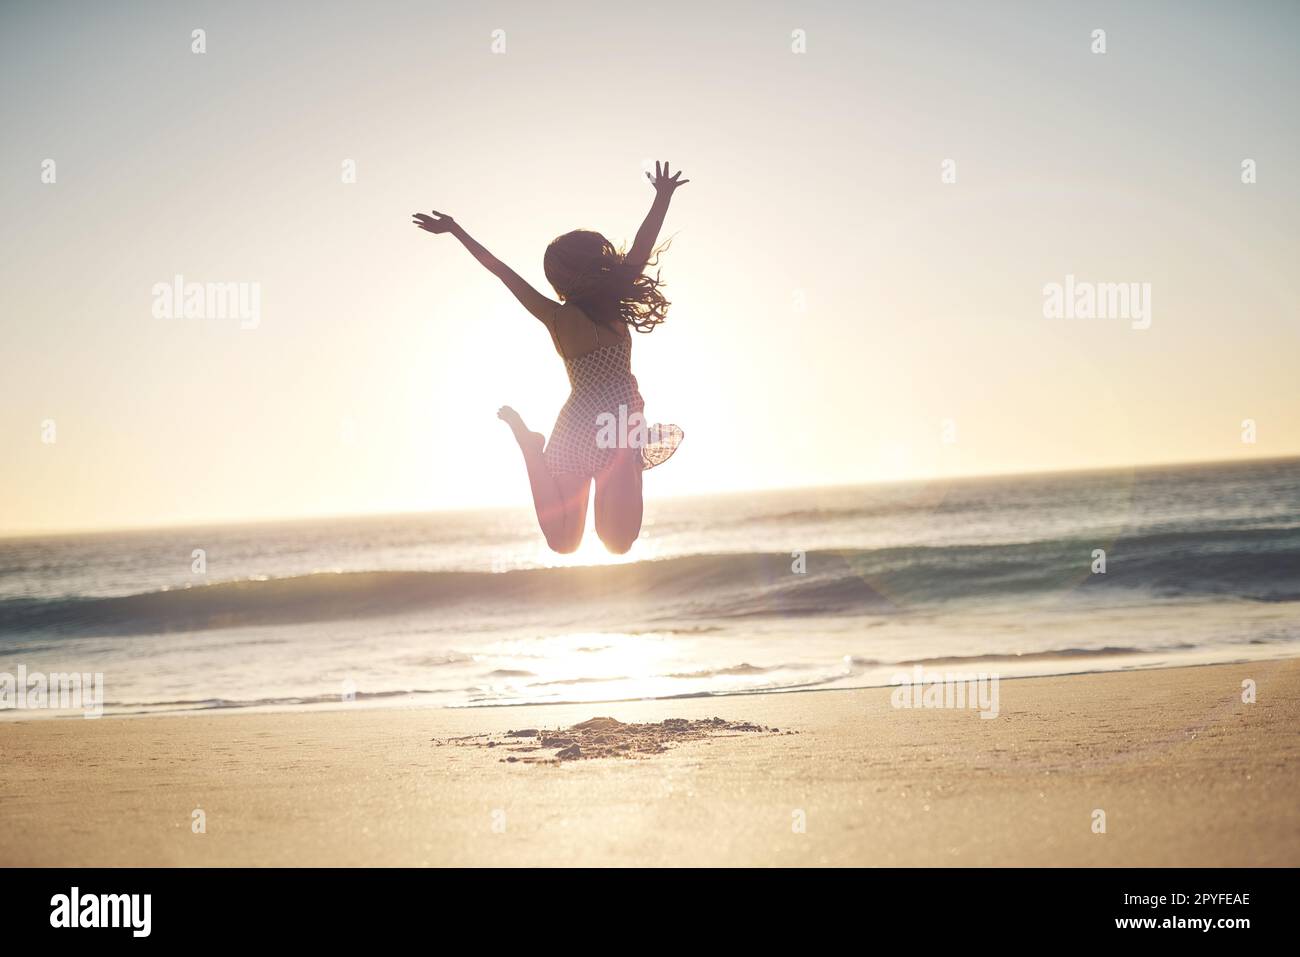 Find what gives you joy and go there. a young woman jumping into mid air at the beach. Stock Photo